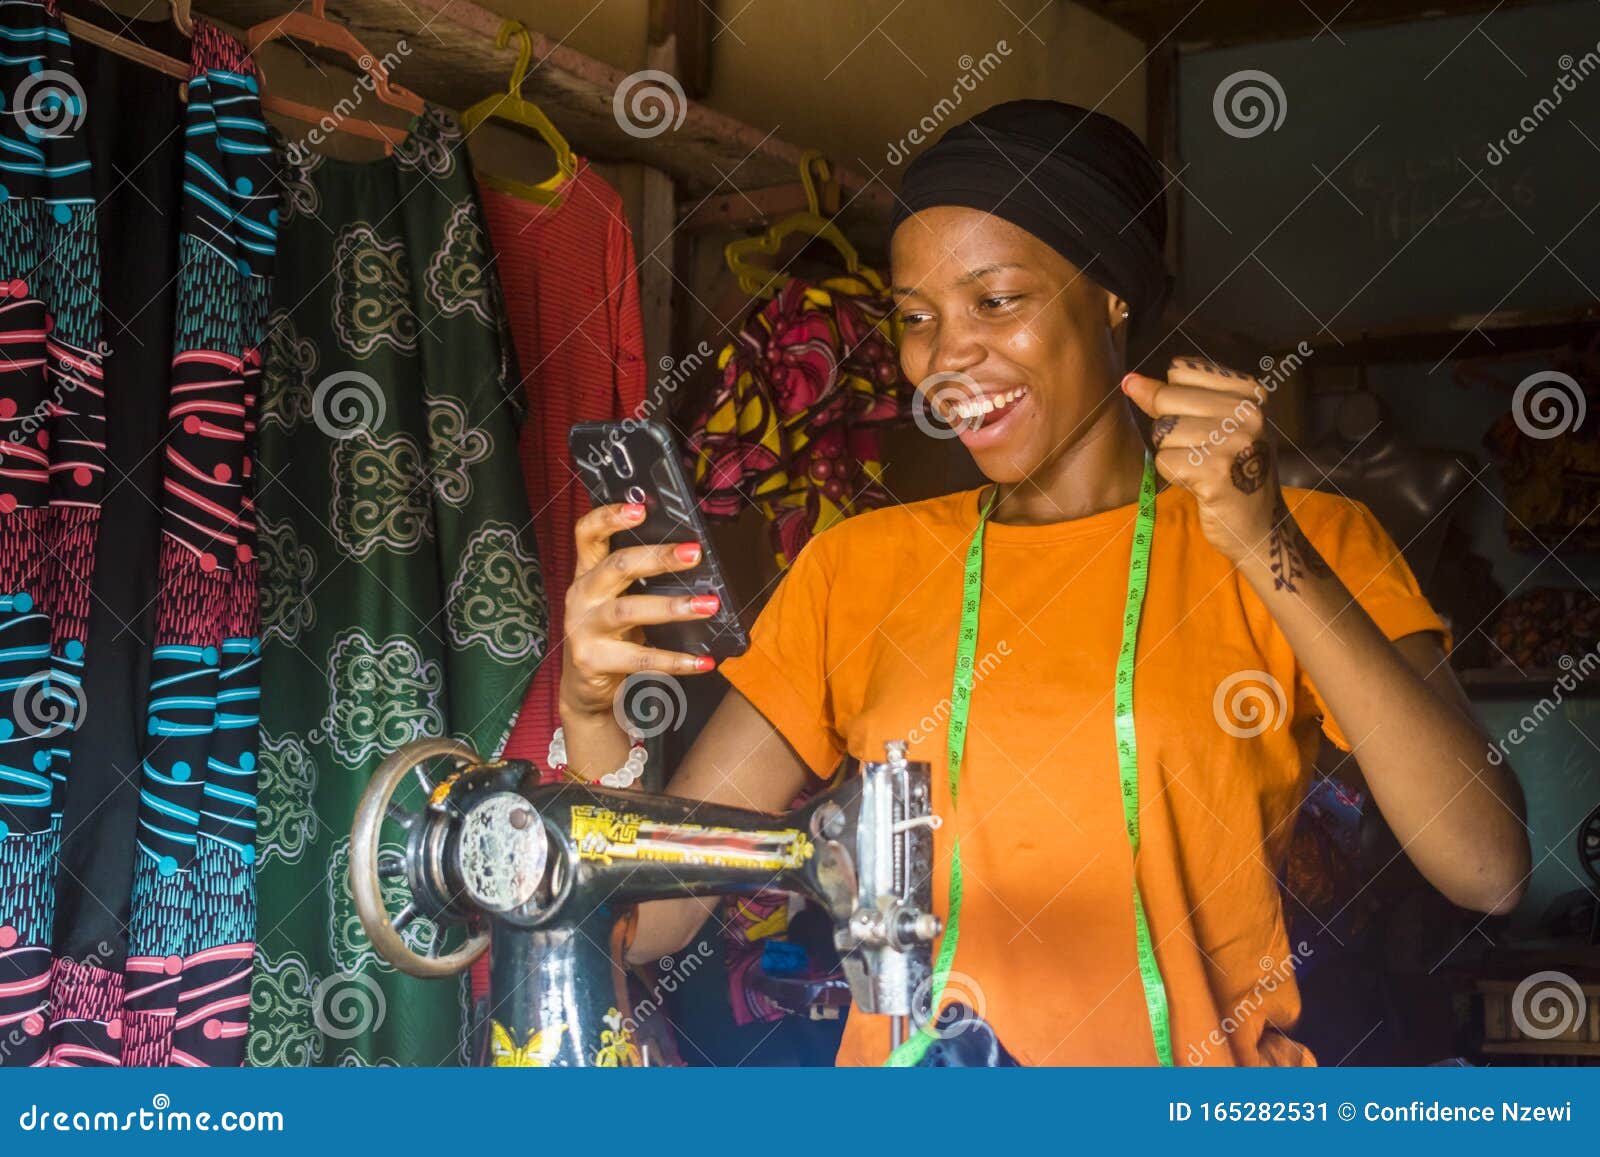 african woman who is a tailor feeling excited and happy and jubilant while viewing content on her mobile phone